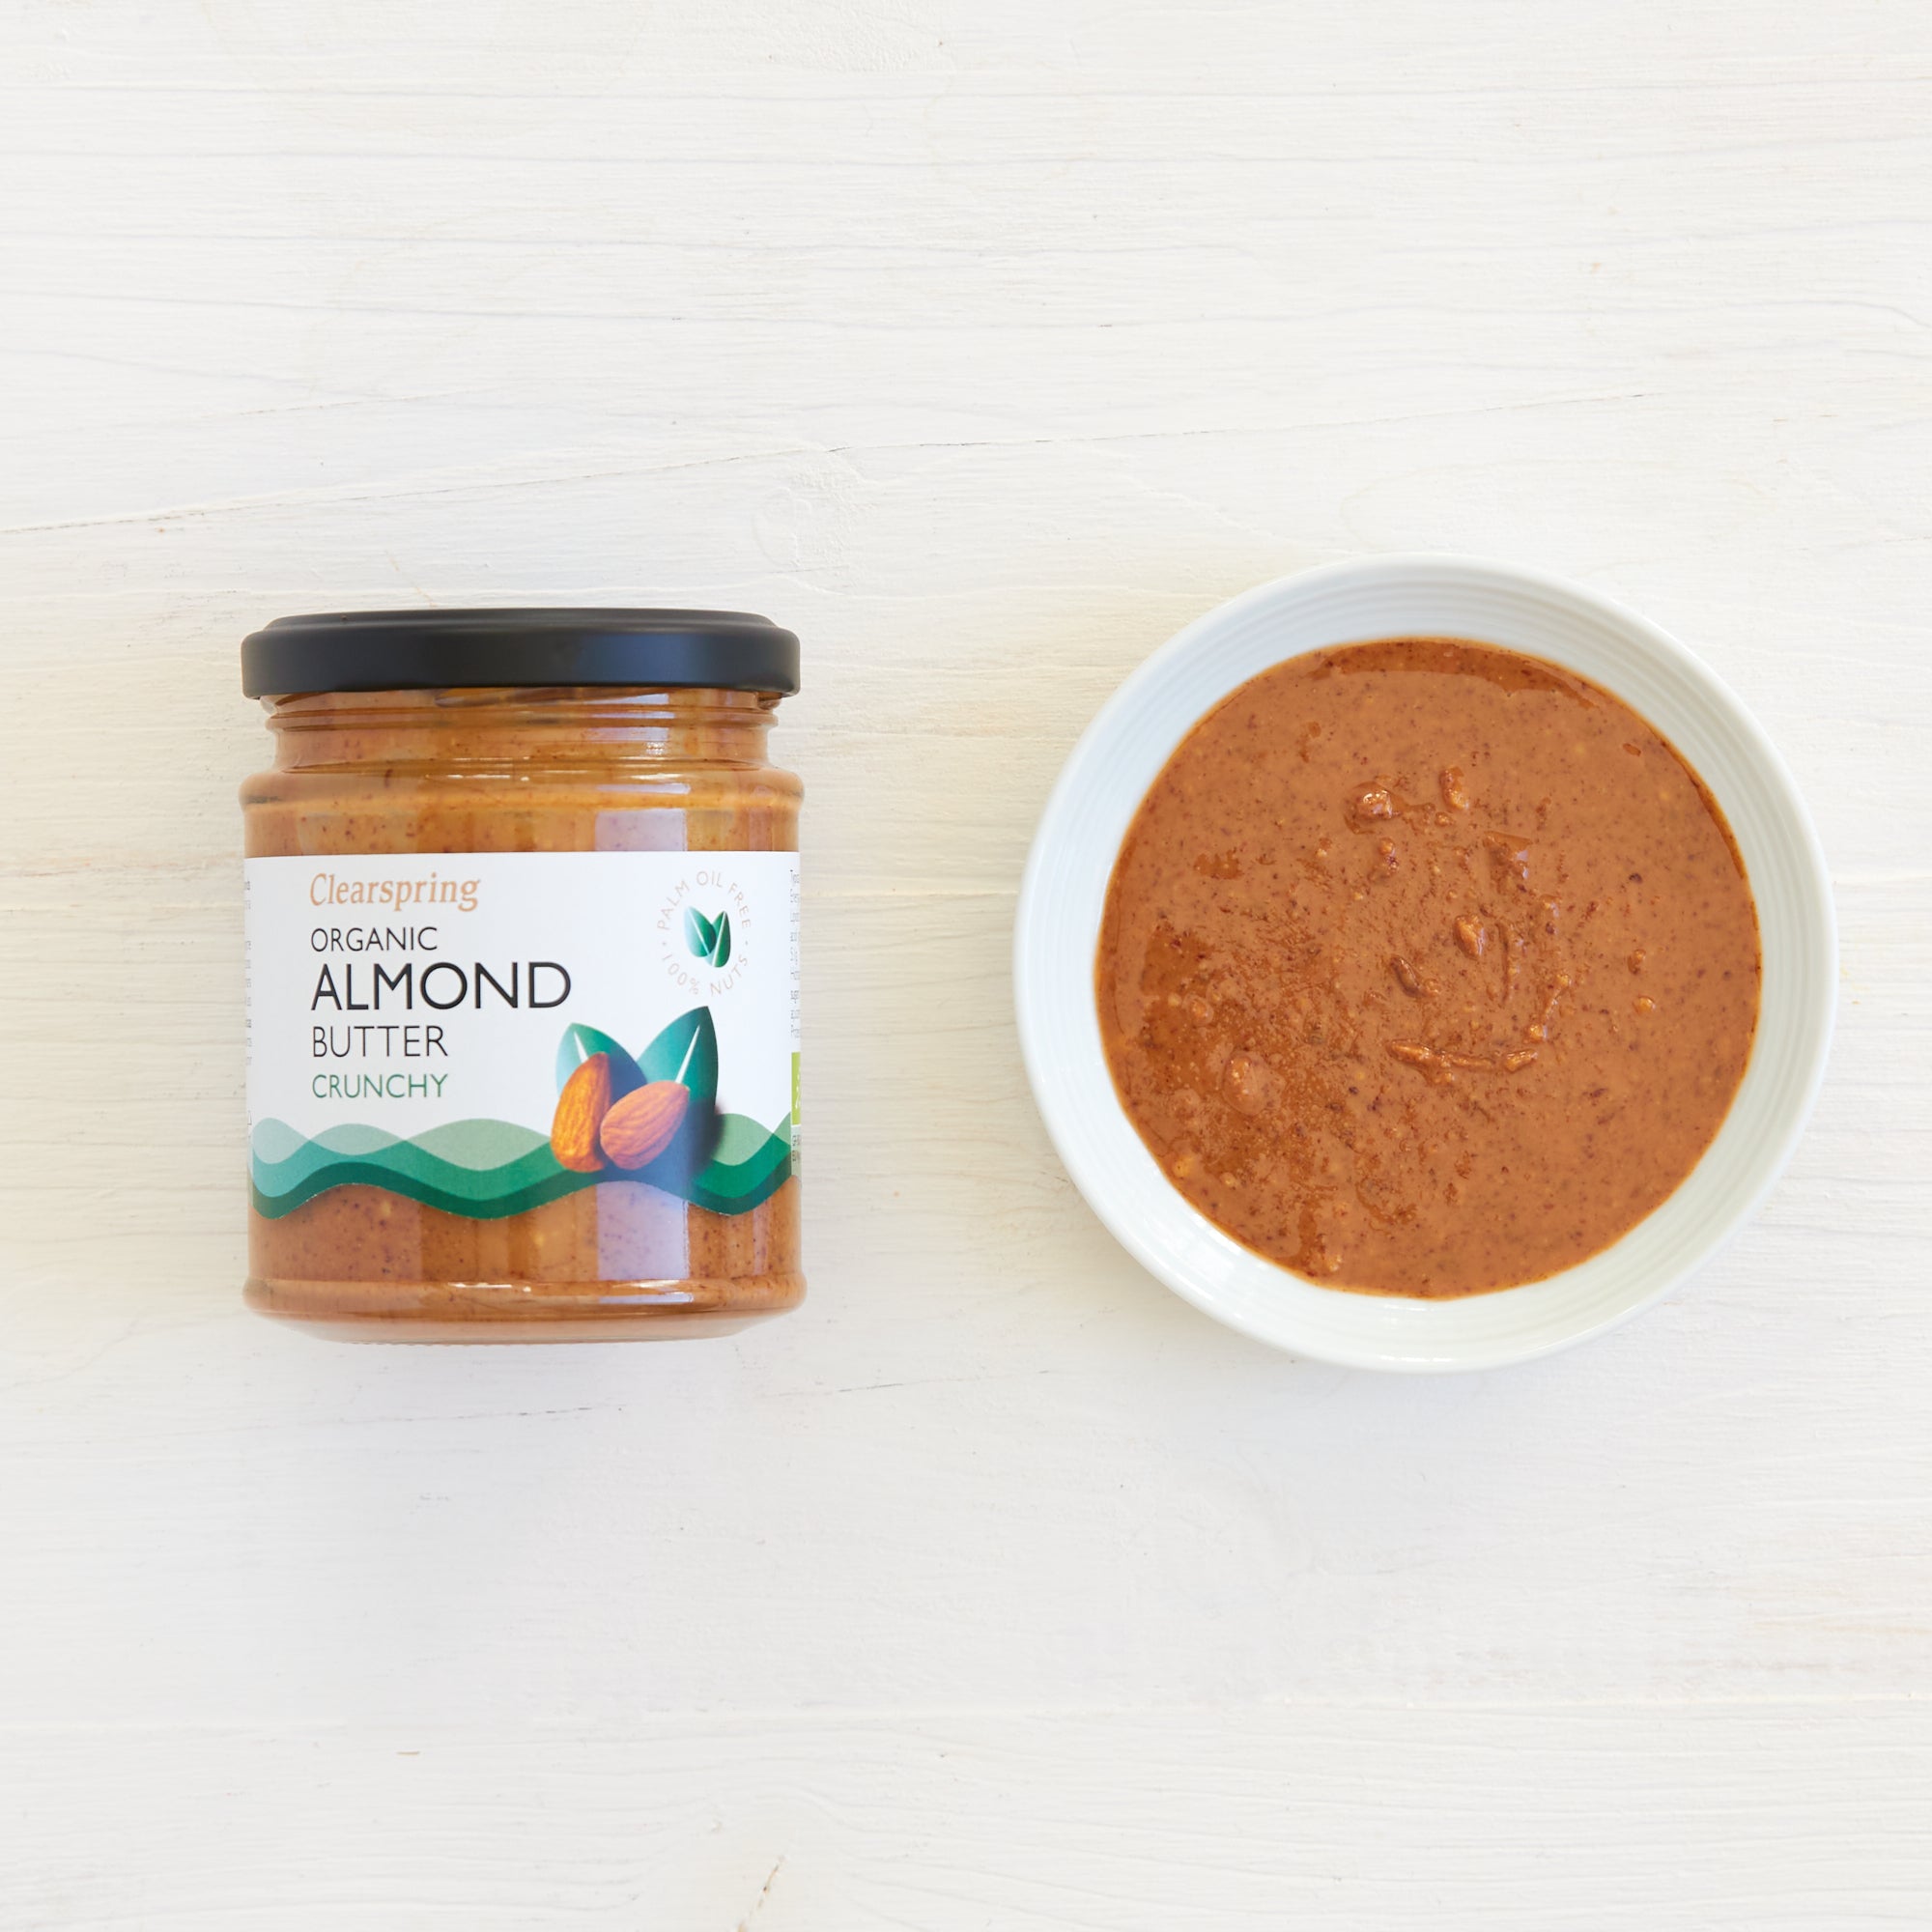 Clearspring Organic Almond Butter - Crunchy